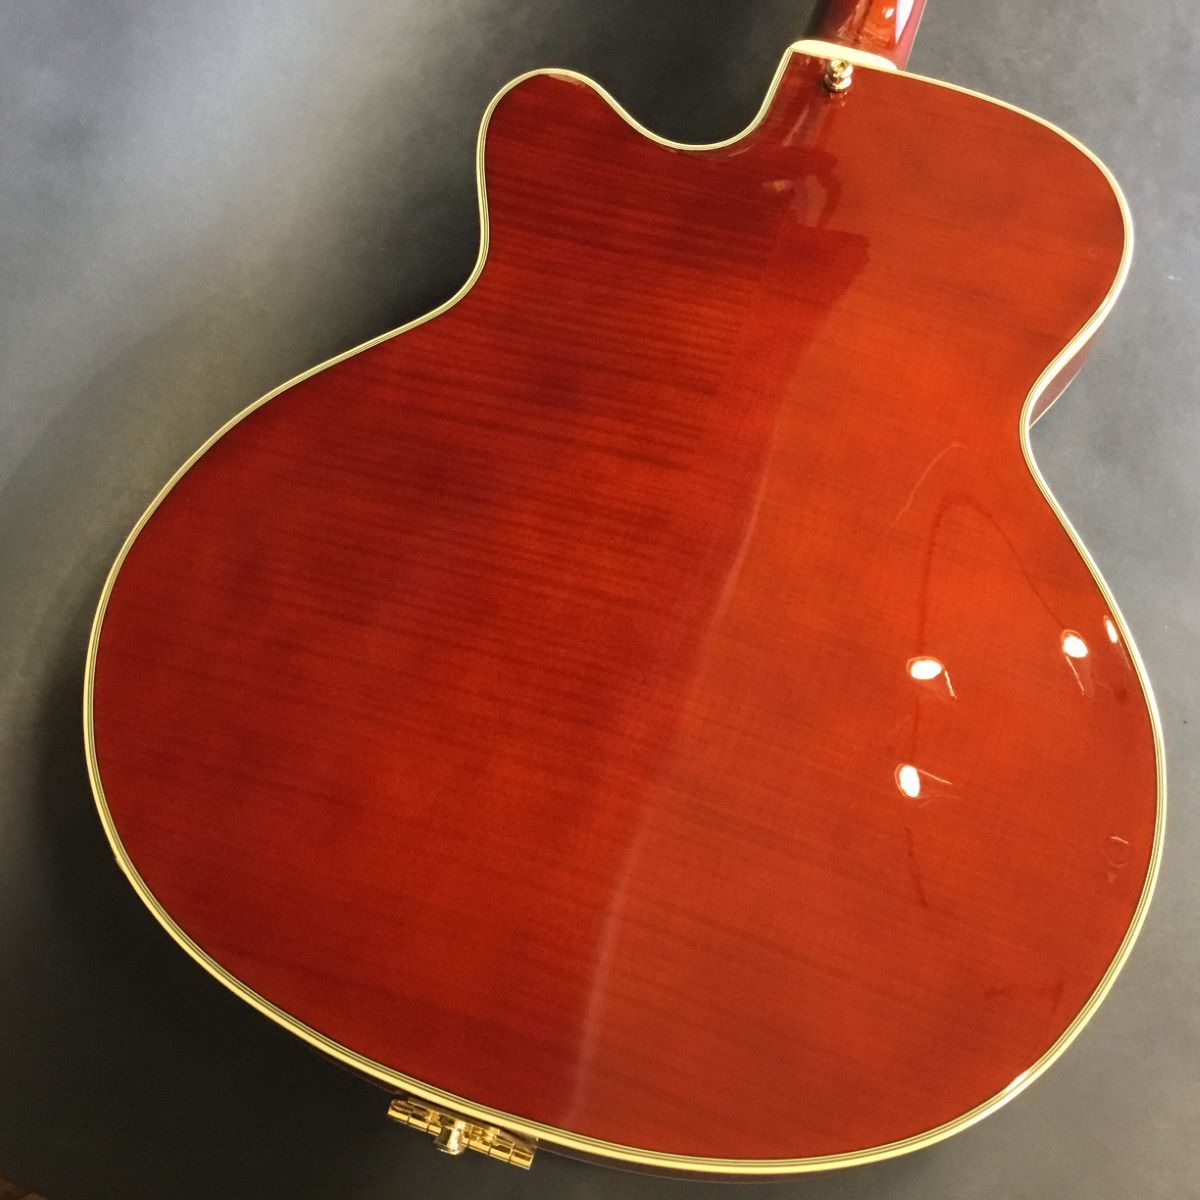 D'Angelico Excel 59